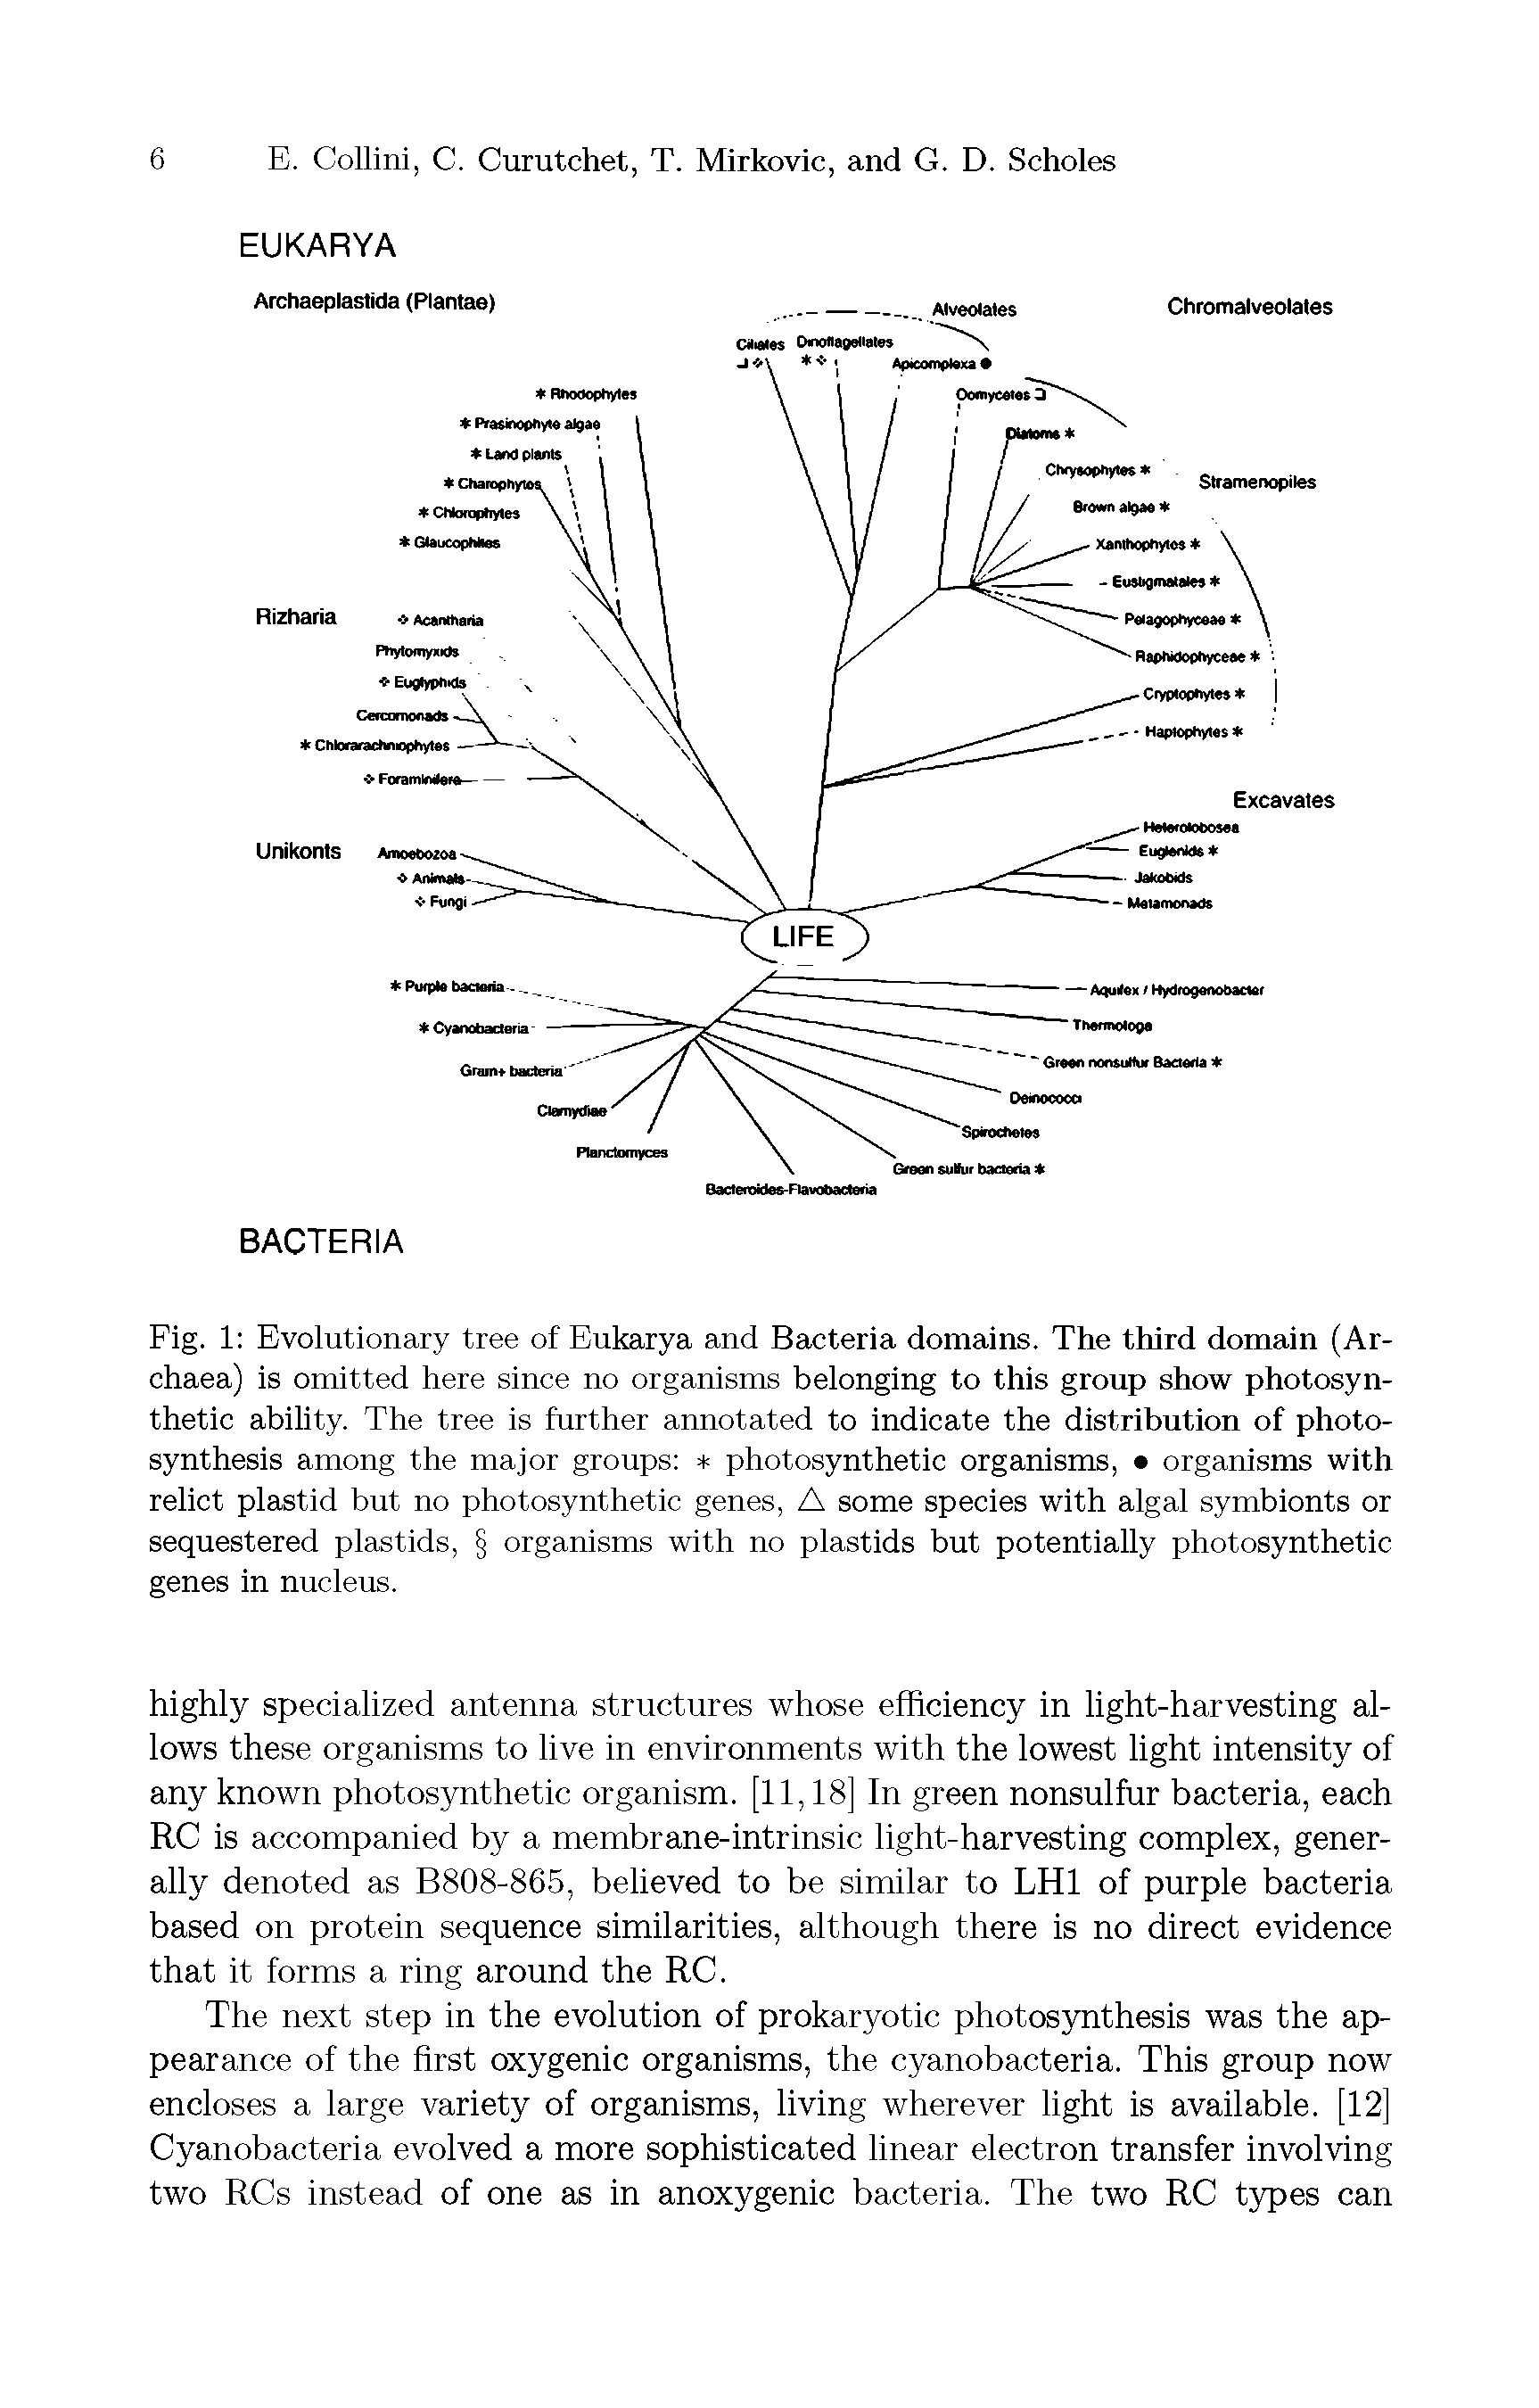 Fig. 1 Evolutionary tree of Eukarya and Bacteria domains. The third domain (Ar-chaea) is omitted here since no organisms belonging to this group show photosynthetic ability. The tree is further annotated to indicate the distribution of photosynthesis among the major groups photosynthetic organisms, organisms with relict plastid but no photosynthetic genes, A some species with algal symbionts or sequestered plastids, organisms with no plastids but potentially photosynthetic genes in nucleus.